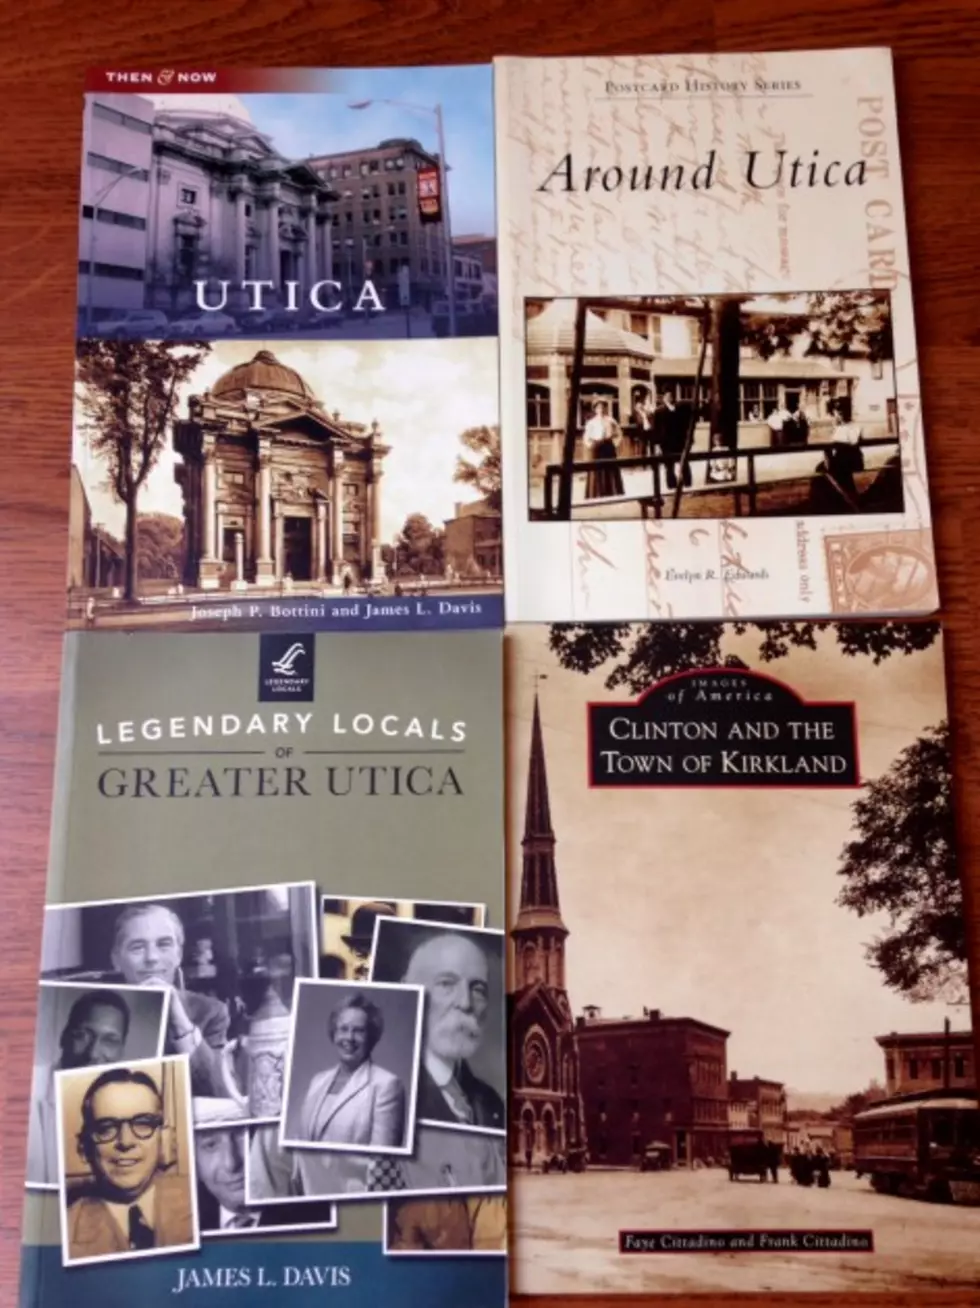 Worth a Read: Books About Utica and the Surrounding Area